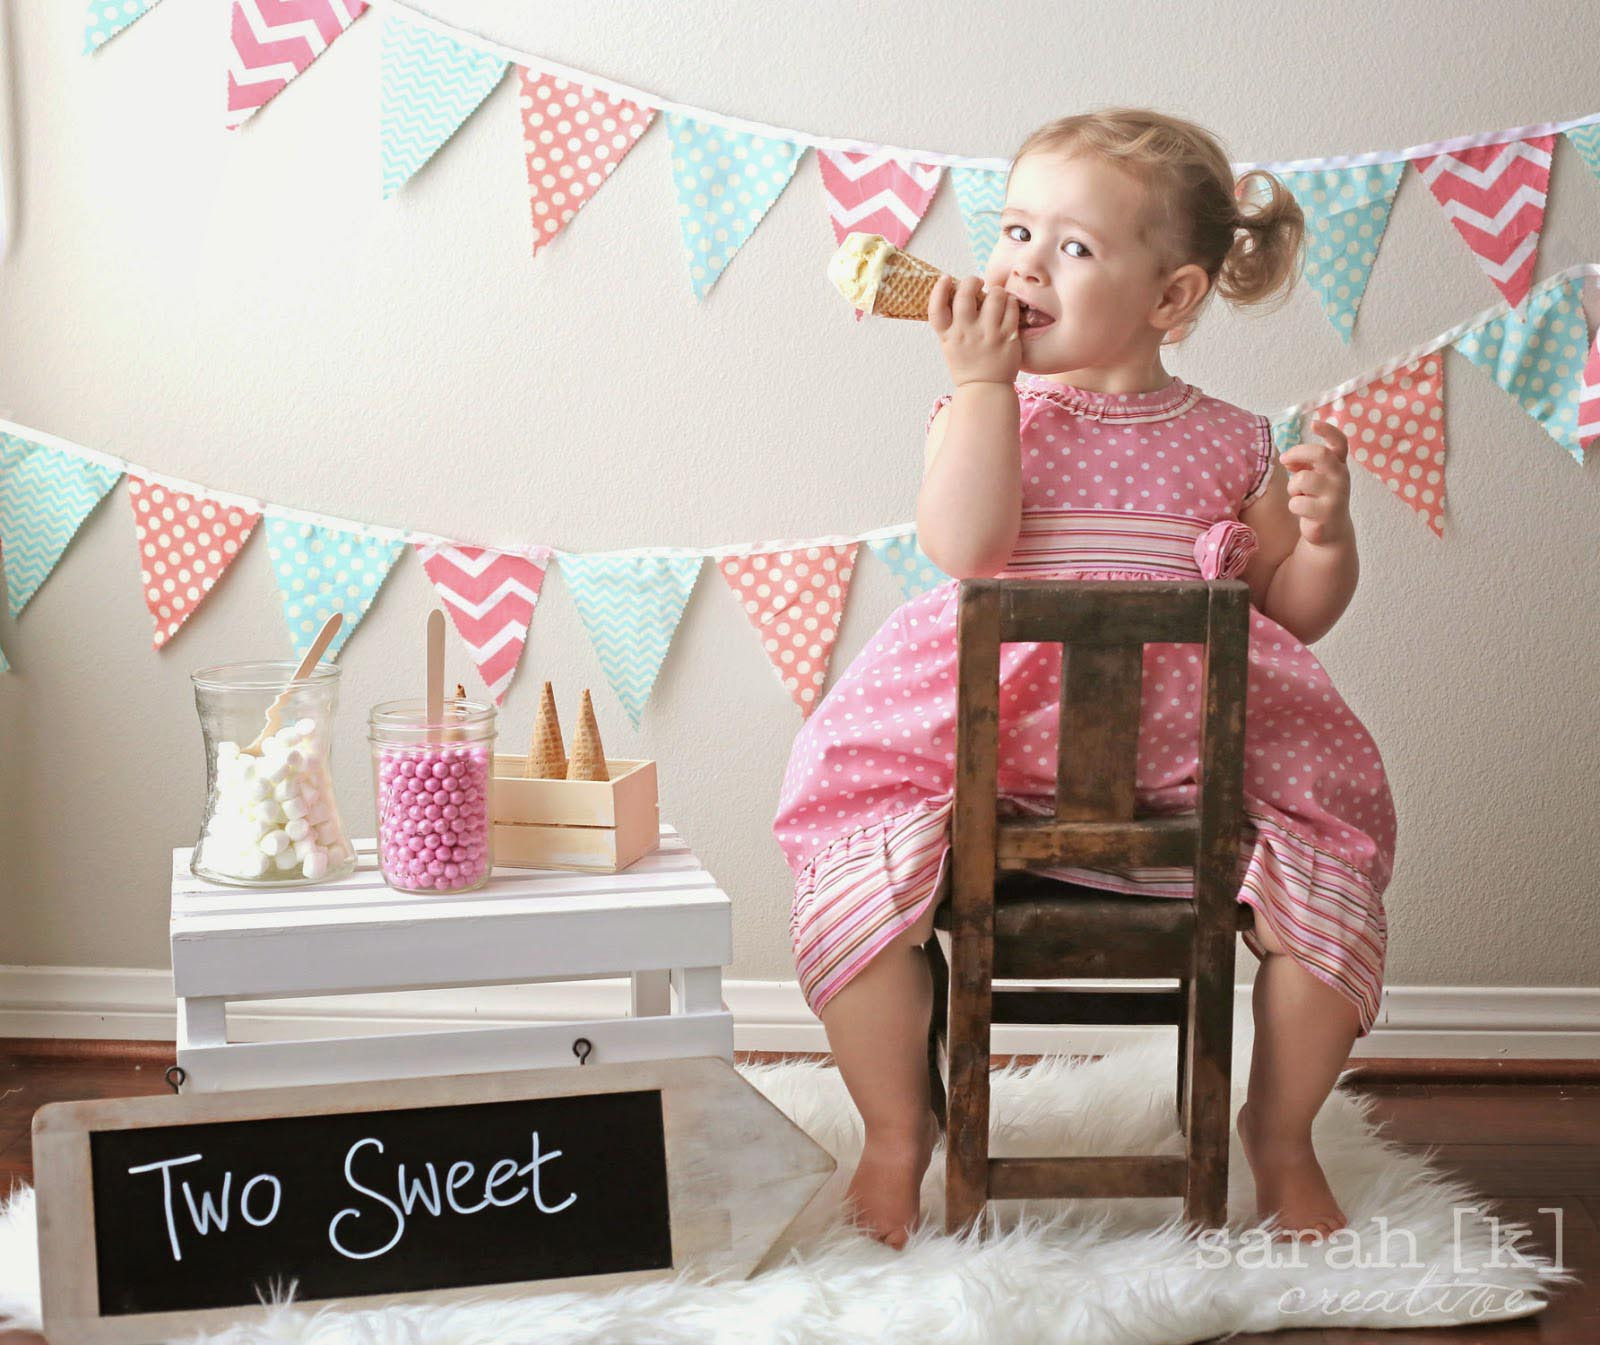 Birthday Party Ideas For 2 Year Old Girl
 Toddler Party Games 2 Year Olds